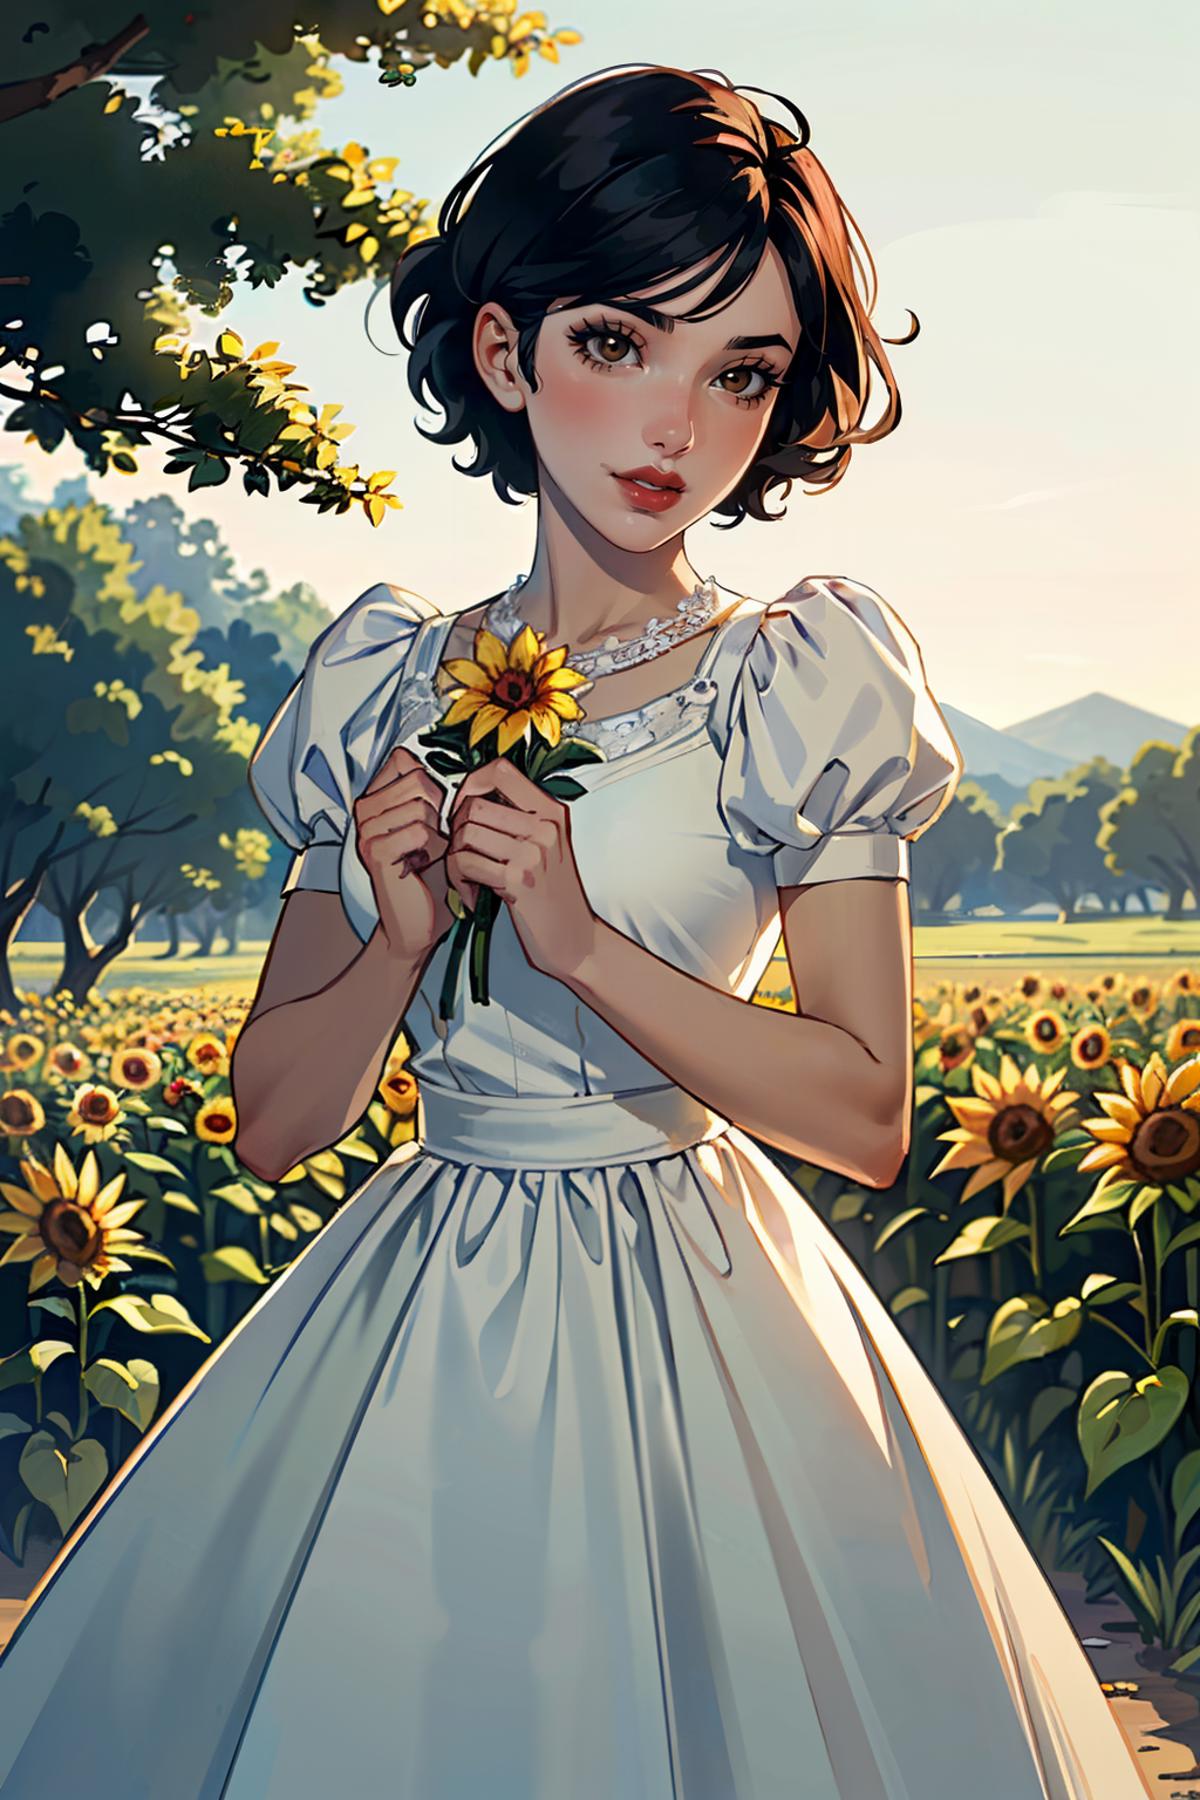 Snow White from Disney image by BloodRedKittie